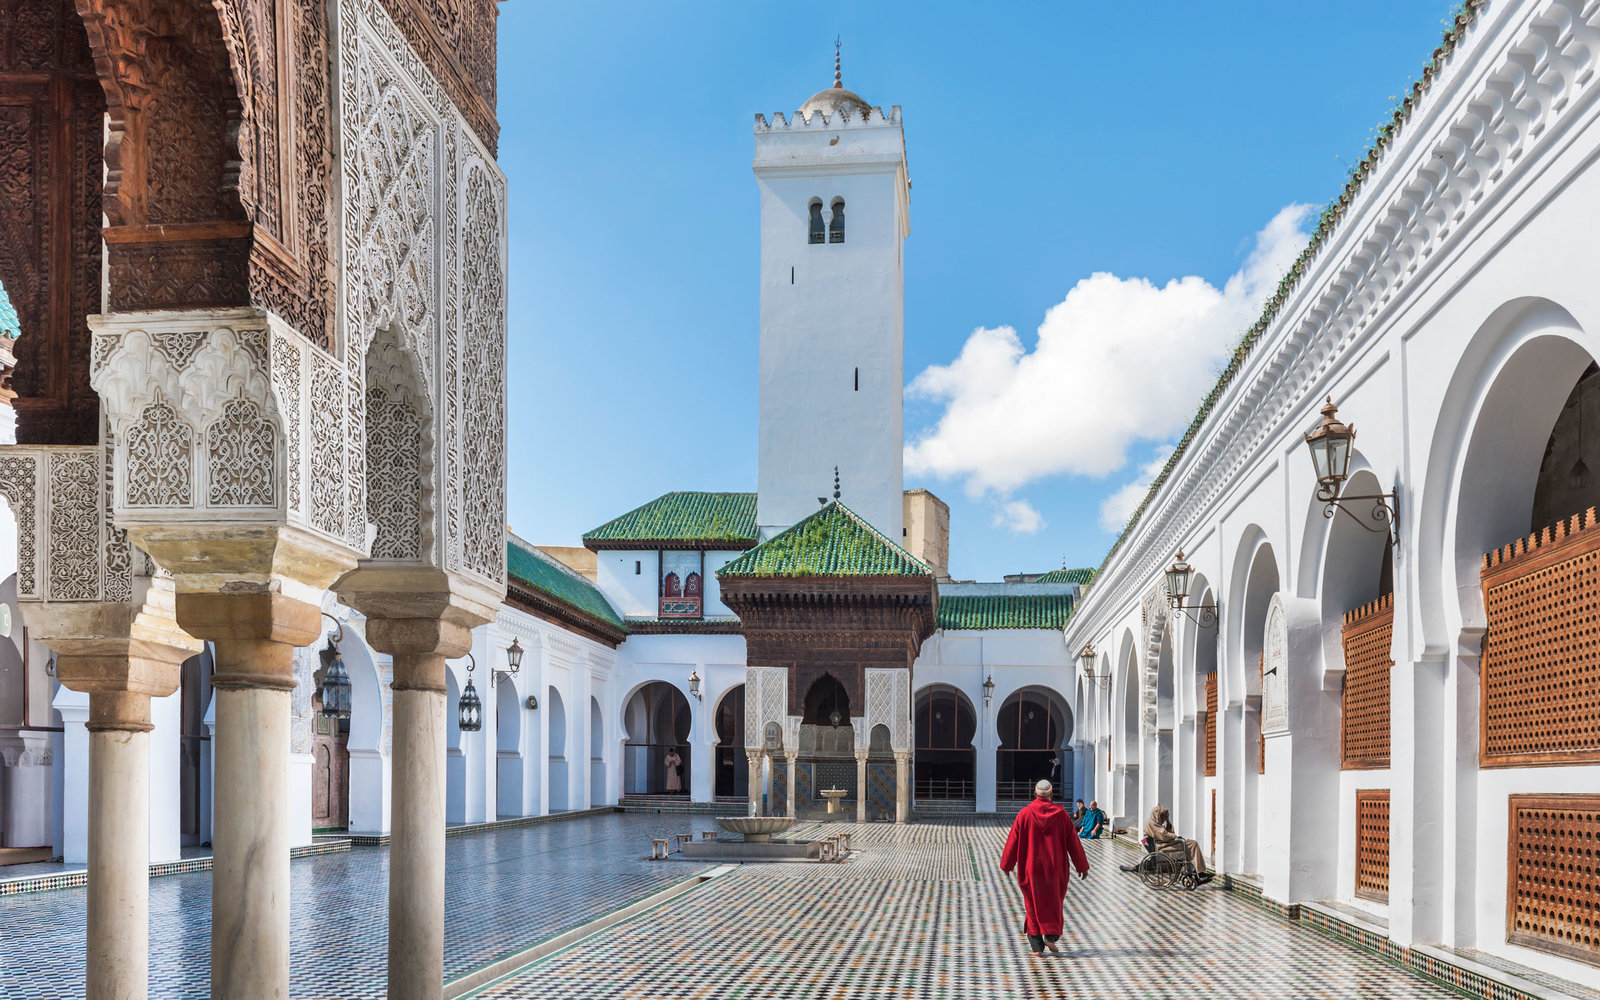 1581258384 796 The most important places of tourism in Morocco for young - The most important places of tourism in Morocco for young people